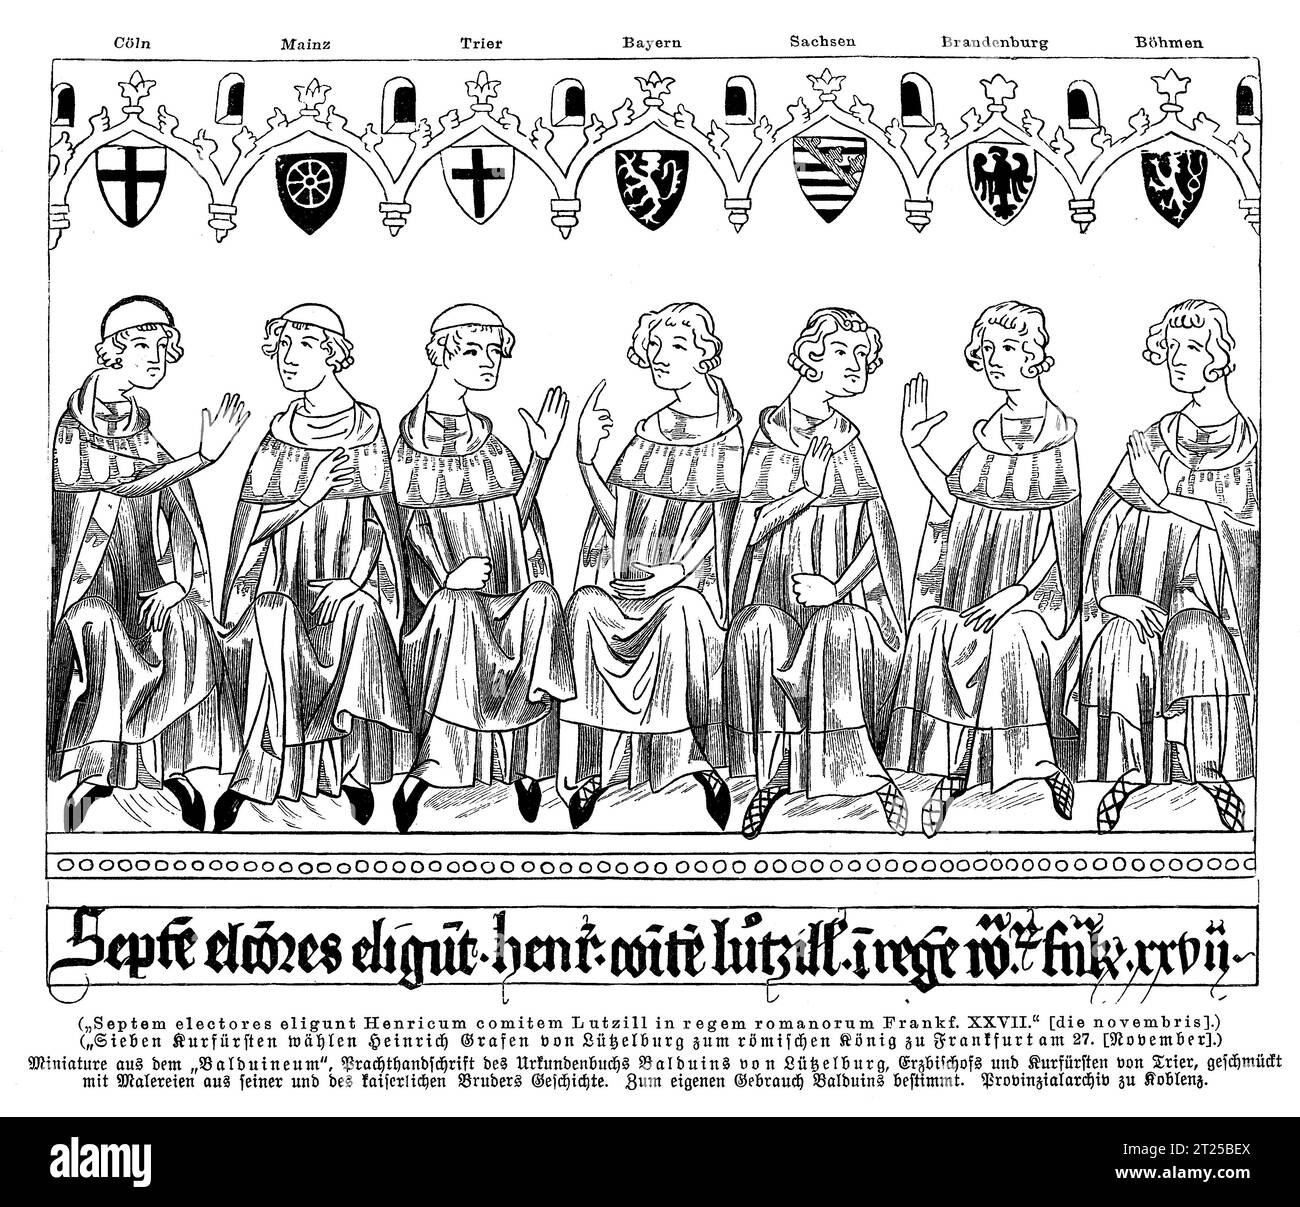 The seven prince-electors members of the electoral college that elected the emperor of the Holy Roman Empire voting for Henry VII, Balduineum picture chronicle, 1341 Stock Photo